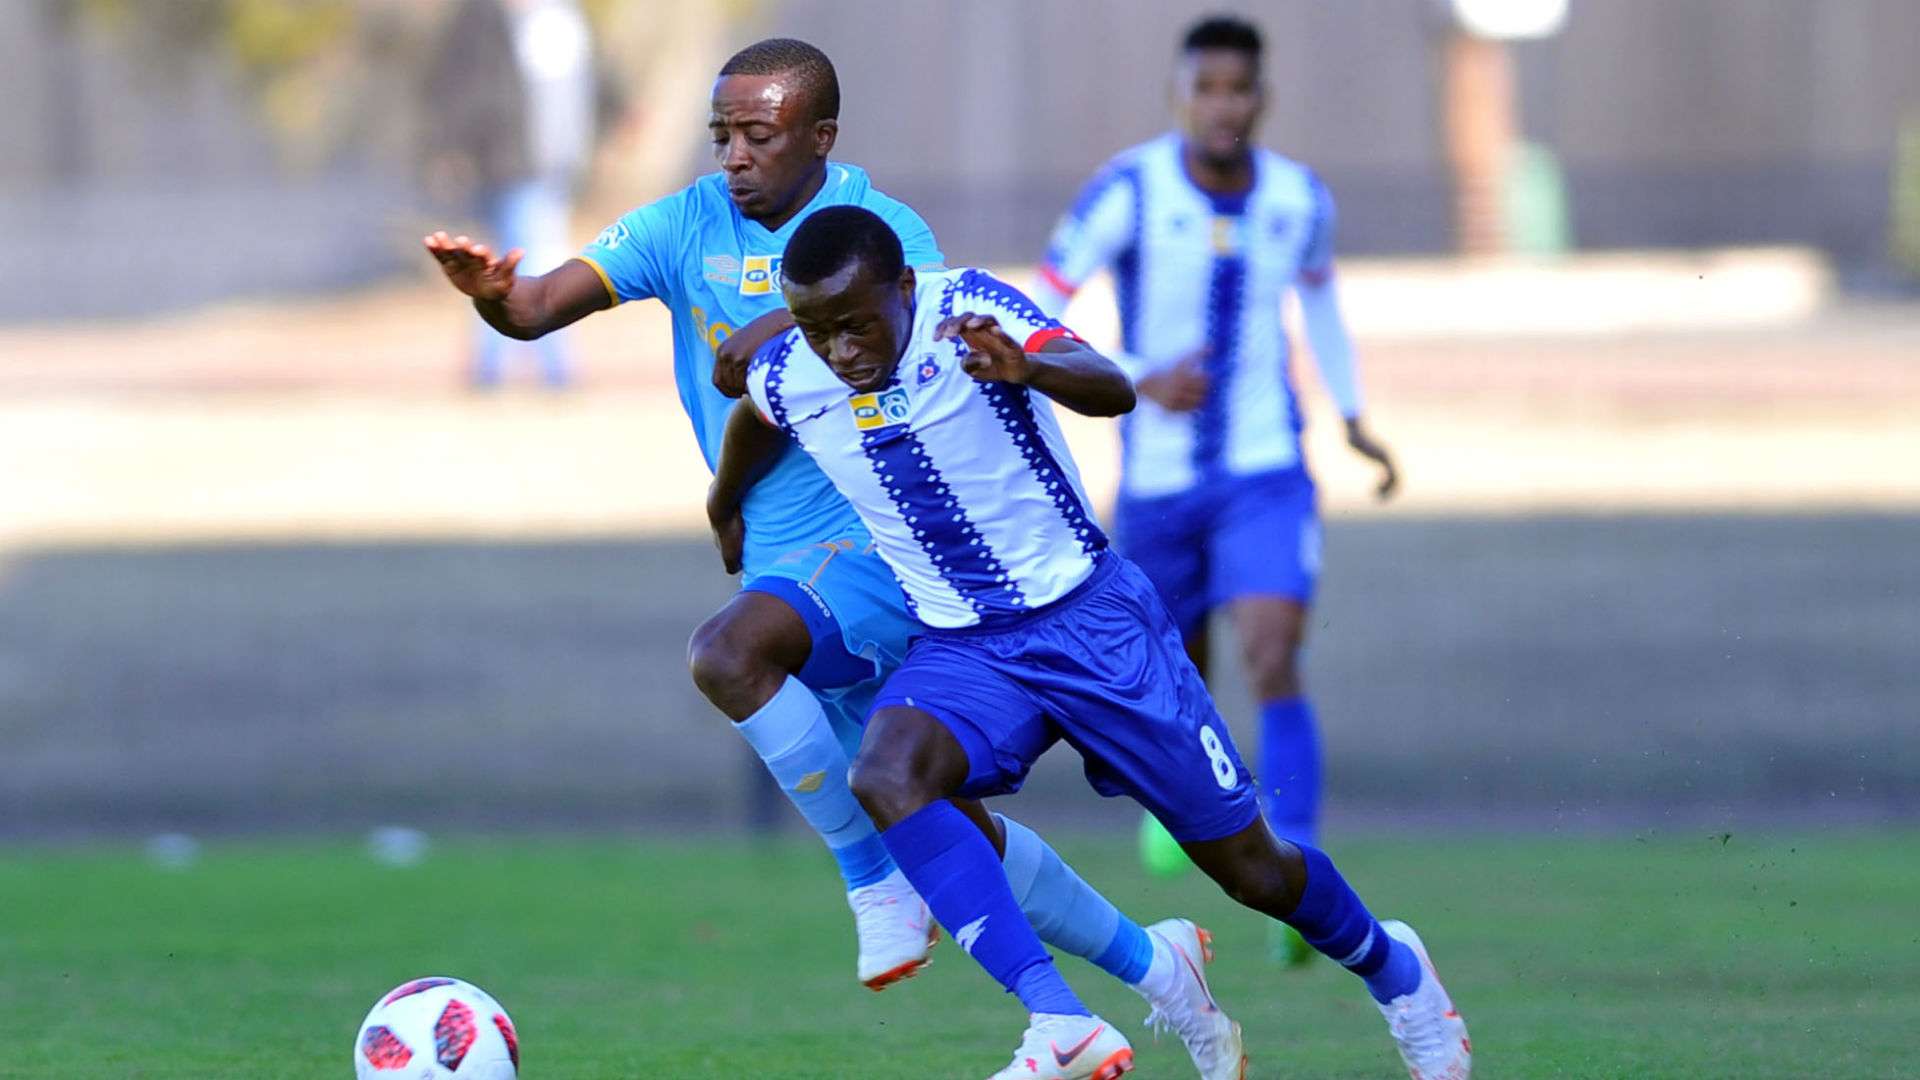 Siphesihle Ndlovu of Maritzburg United is challenged by Thabo Nodada of Cape Town City, August 2018